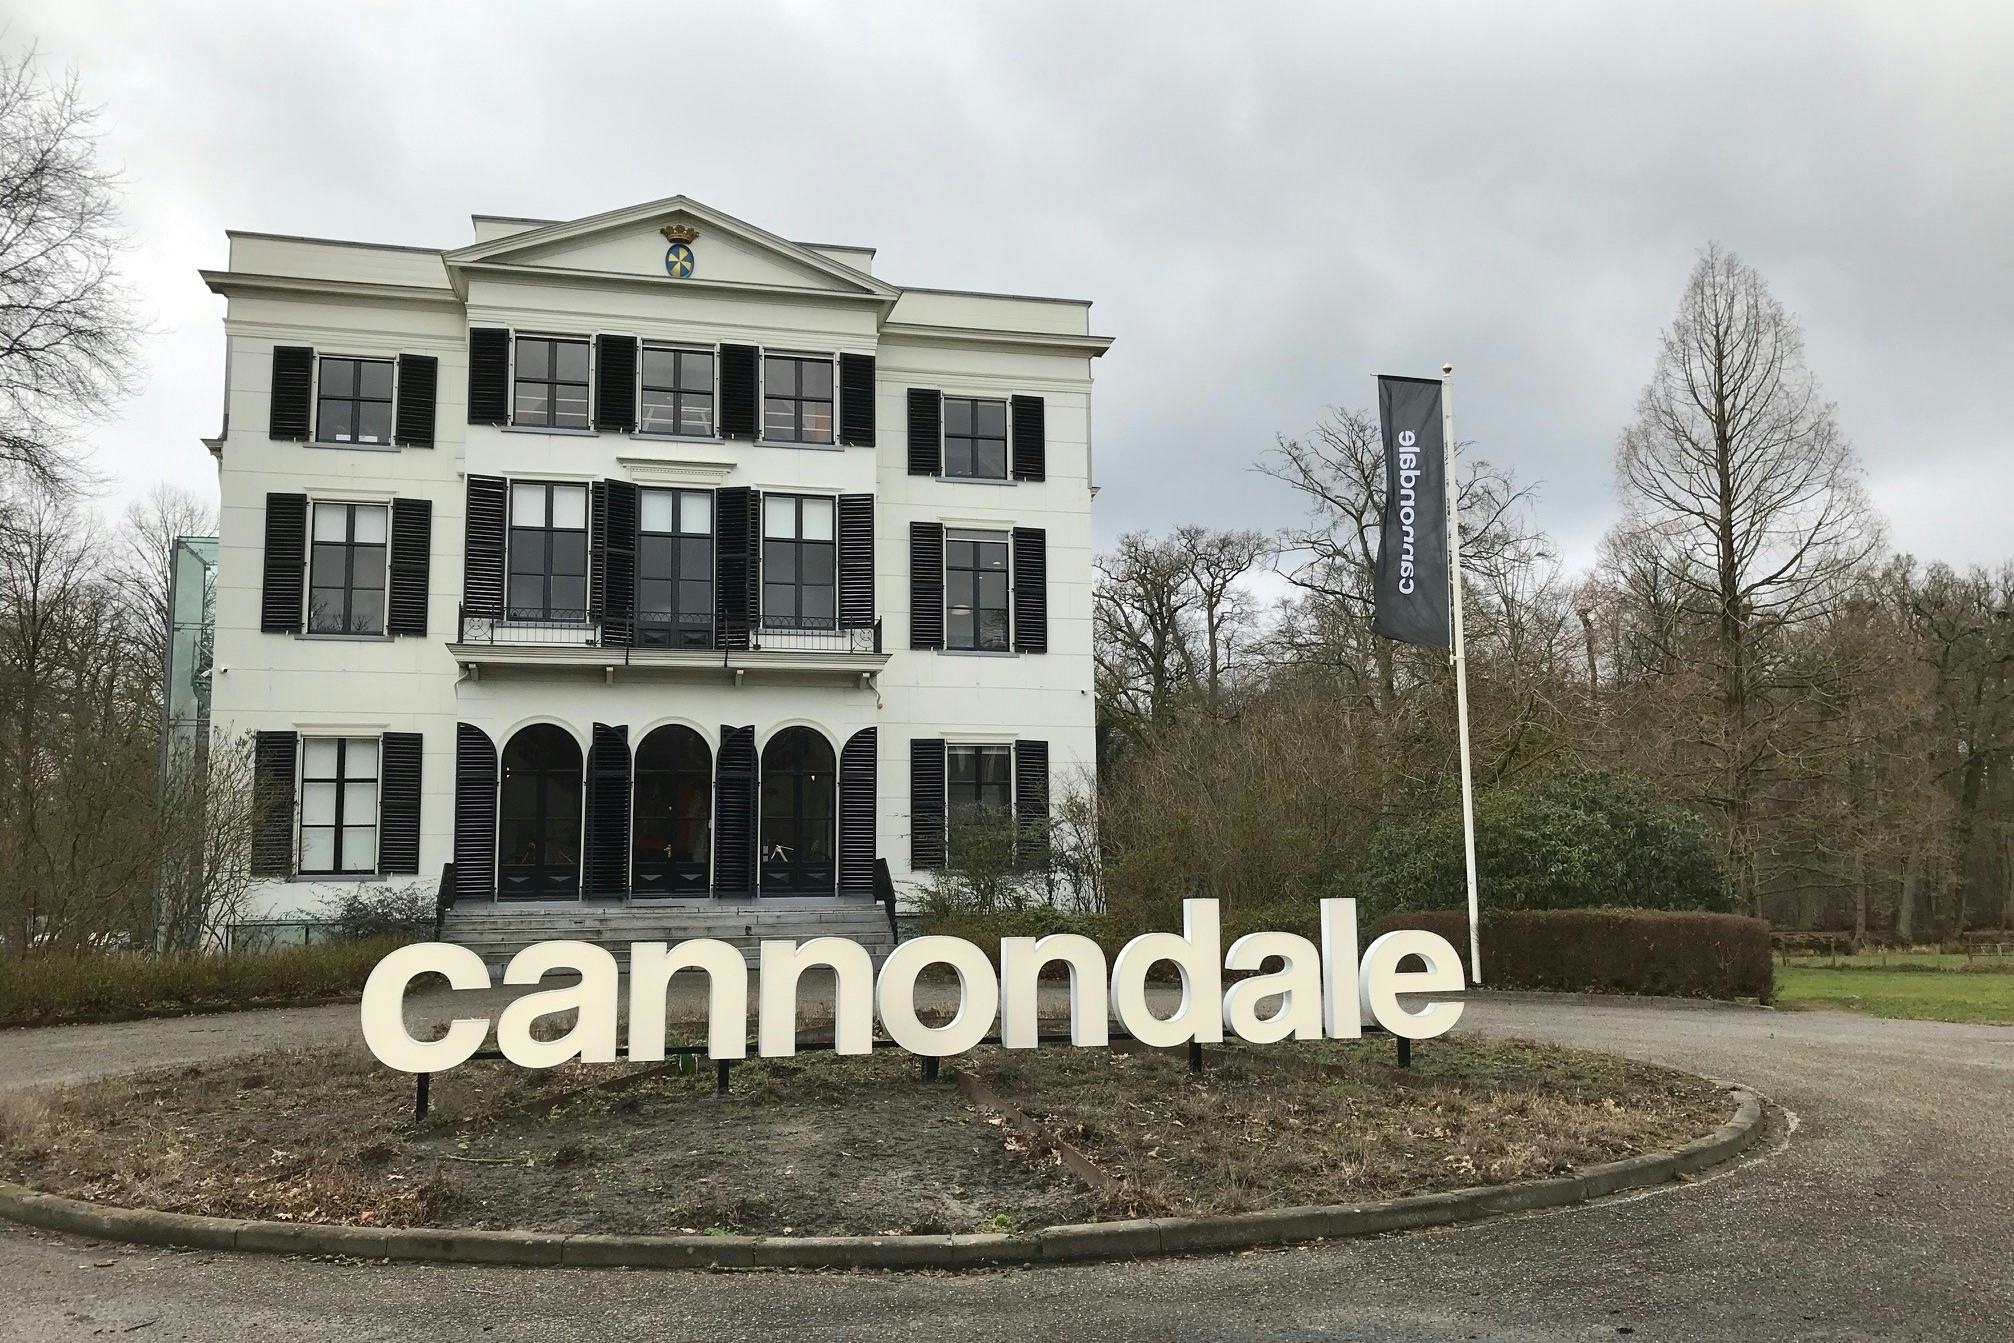 2021 marks 50 years of the Cannondale brand which is now strongly repositioning itself in the European bicycle market. - Photos Bike Europe 